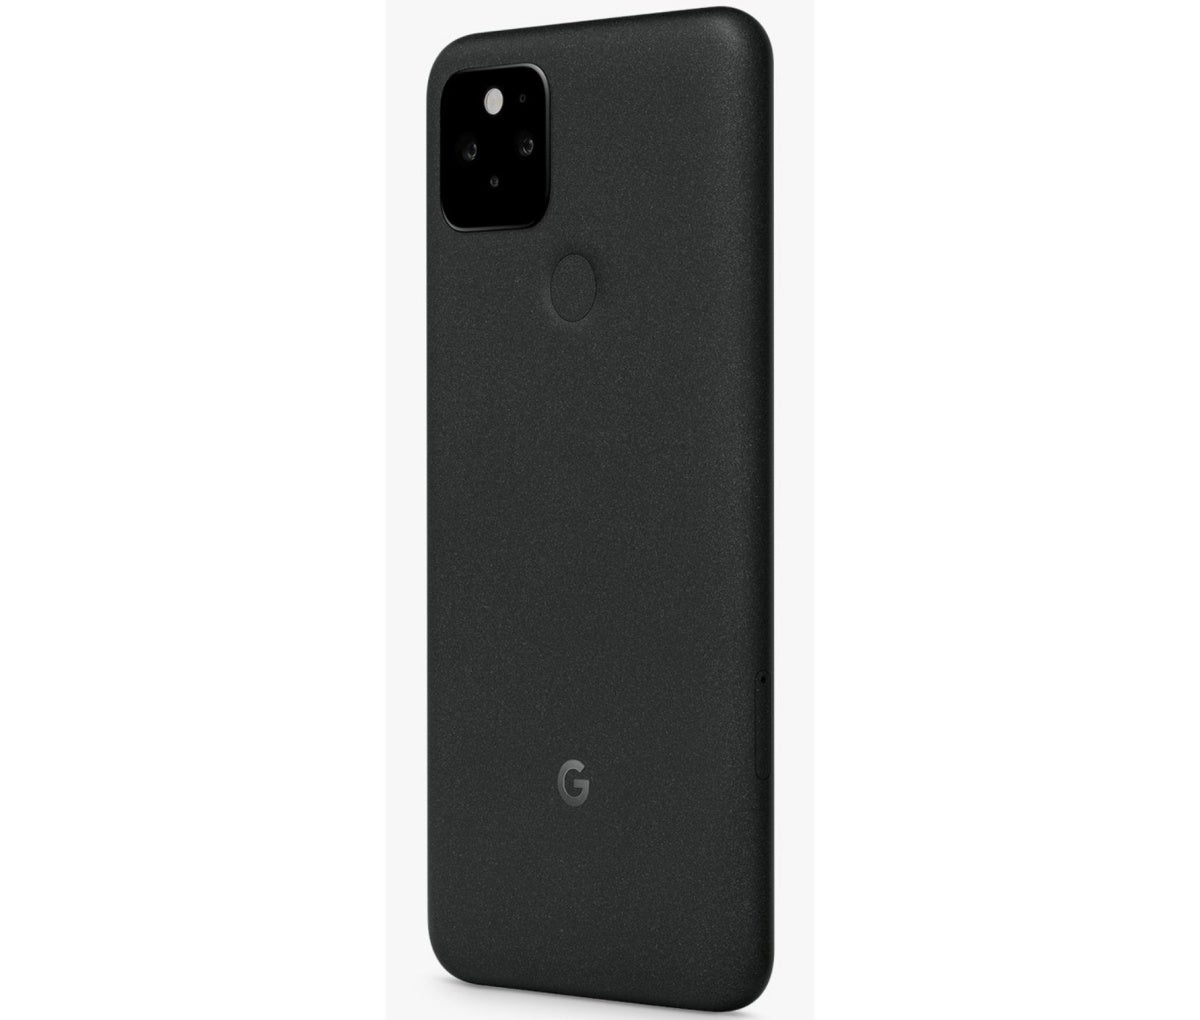 Last-minute Pixel 5 5G leak showcases the Google phone out in the wild